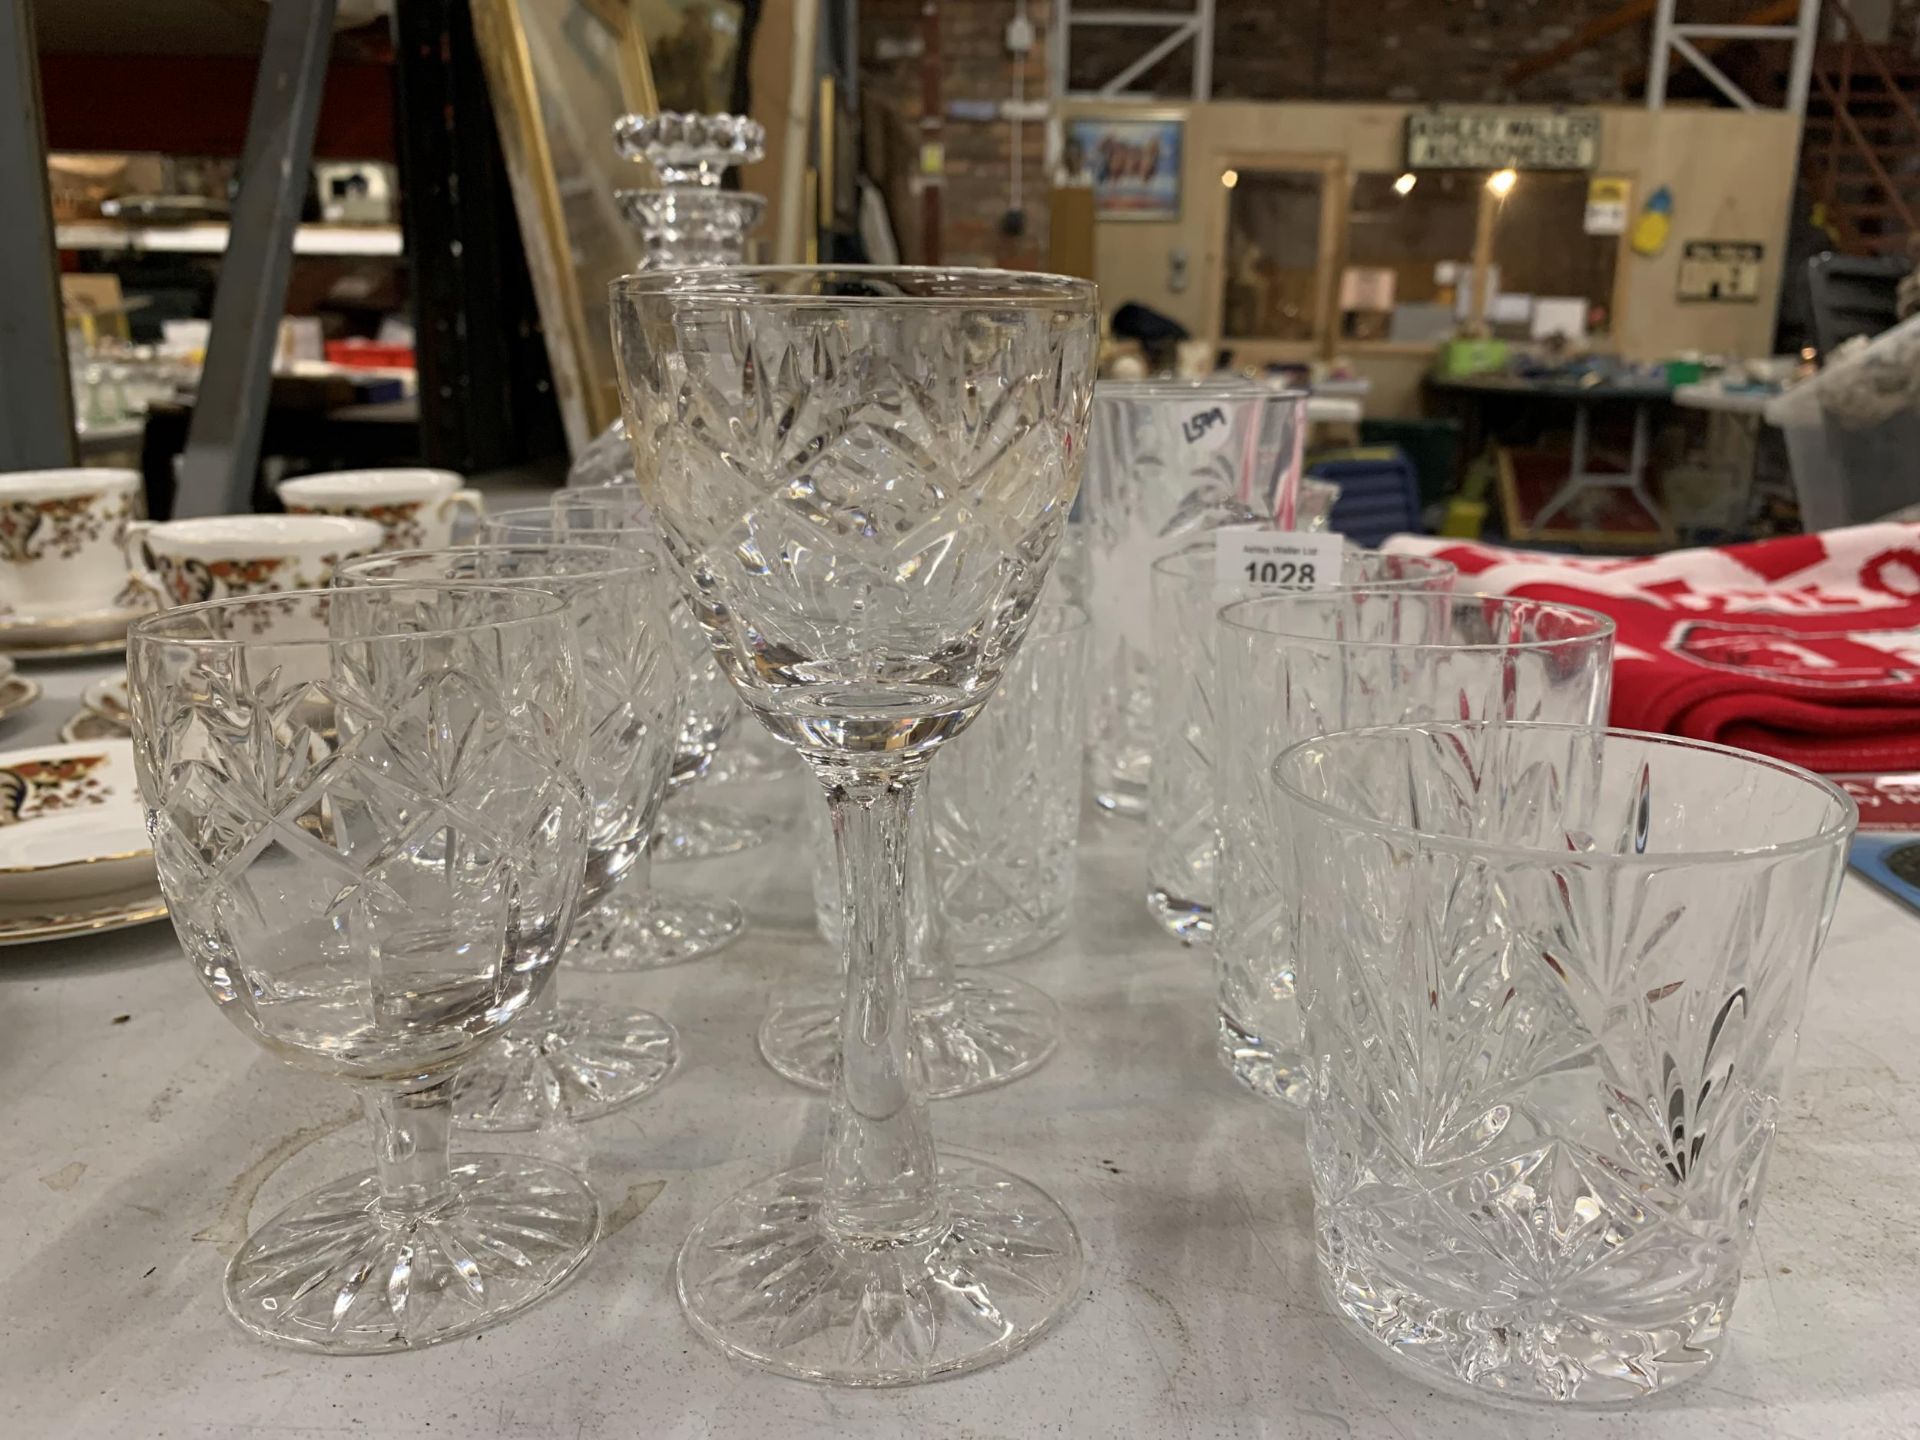 A LARGE QUANTITY OF GLASSWARE TO INCLUDE A DECANTER, BRANDY GLASSES, WINE GLASSES, TUMBLERS, ETC., - Image 3 of 4